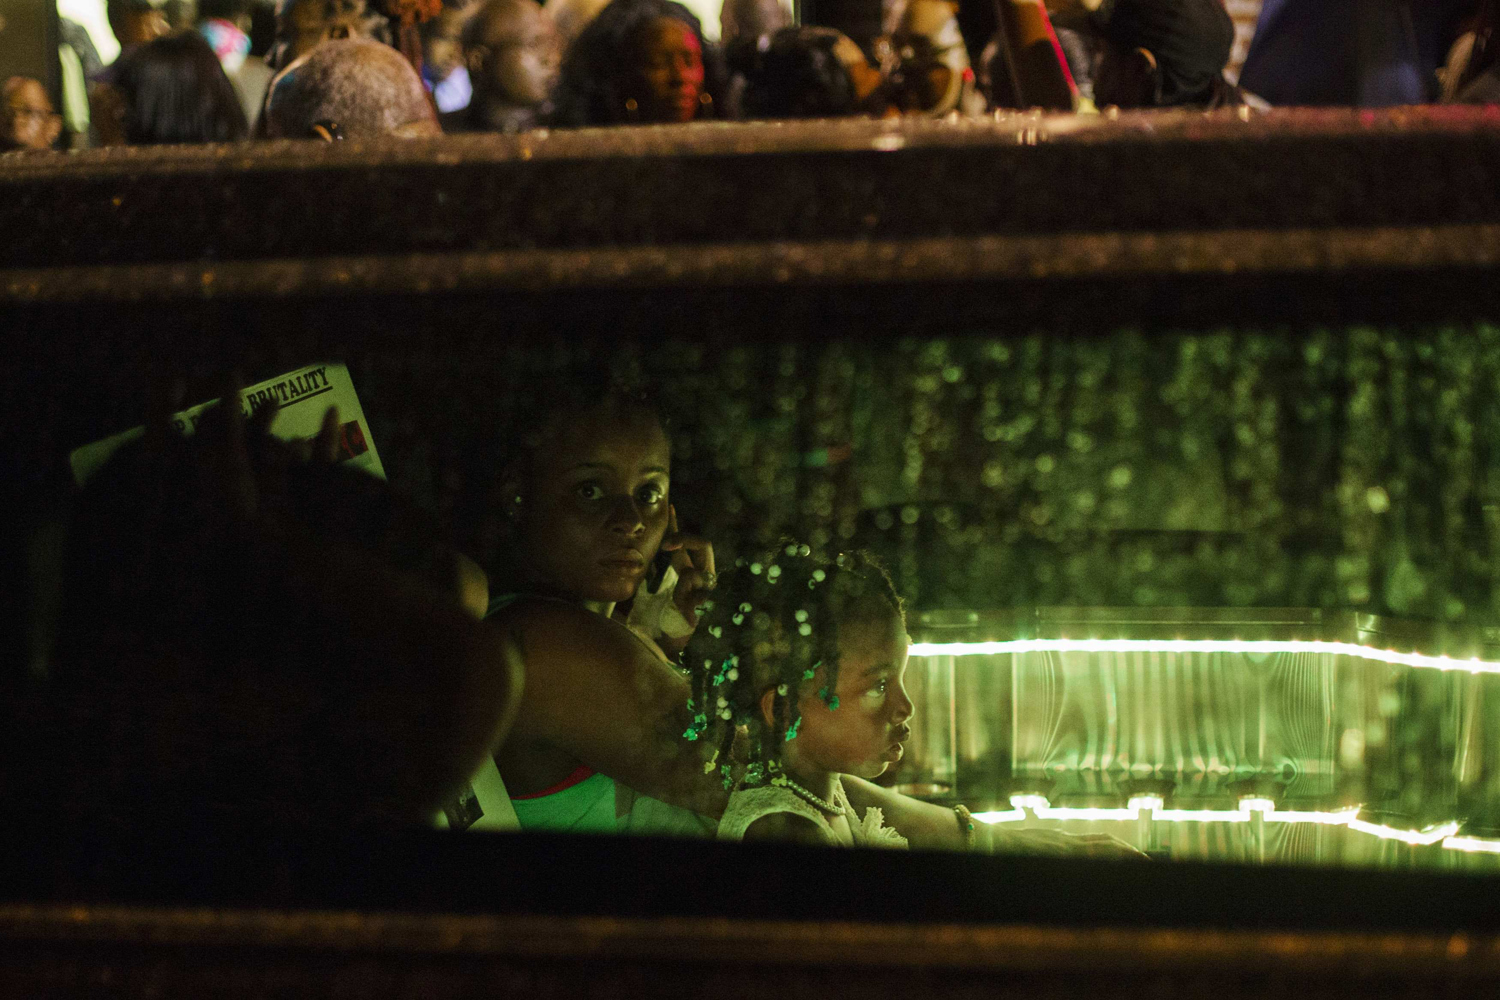 Mourners wait in a limousine after attending the funeral of Eric Garner in New York